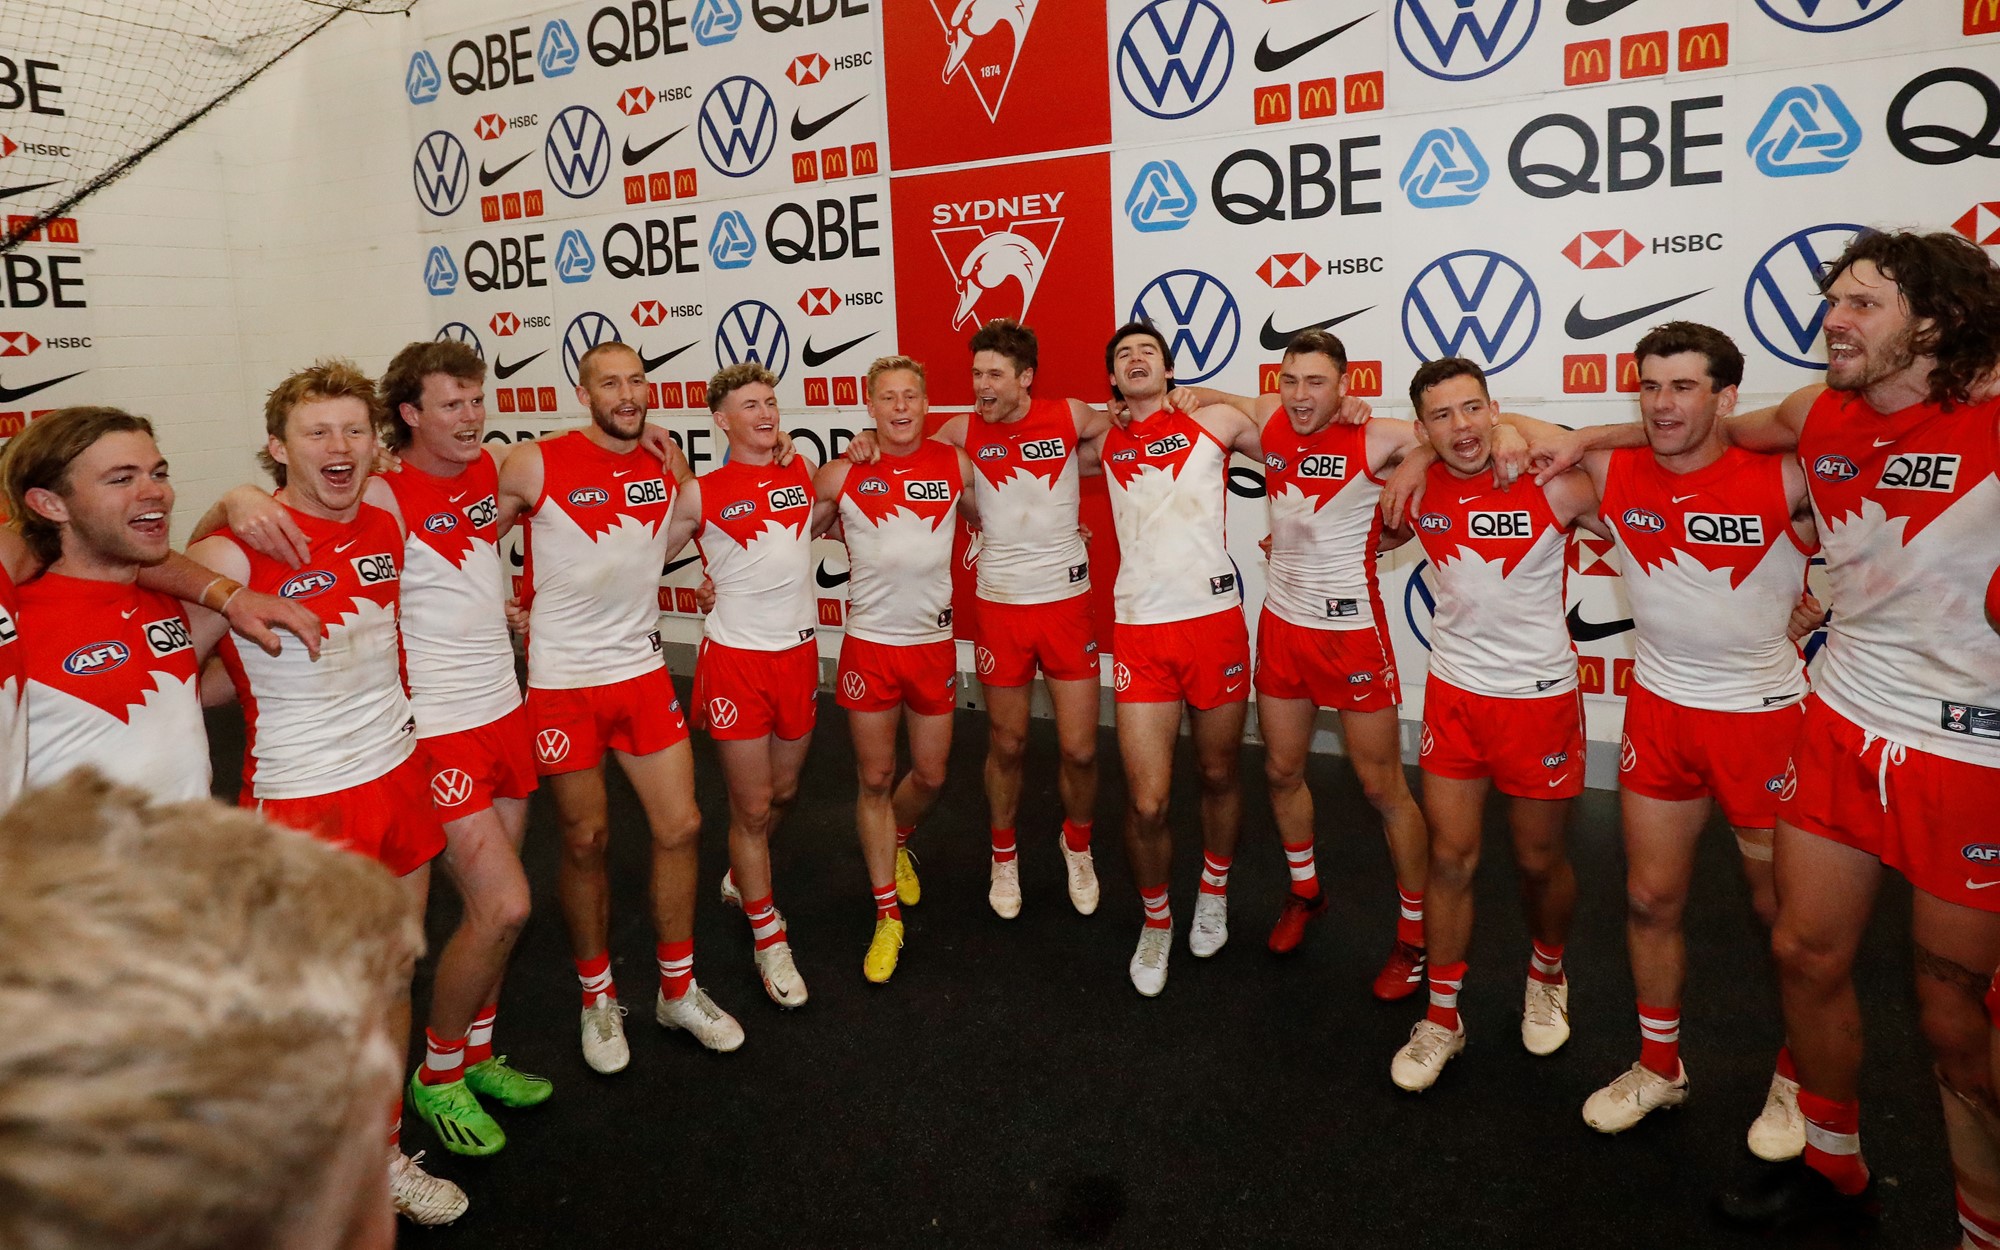 The Sydney Swans sing the team song